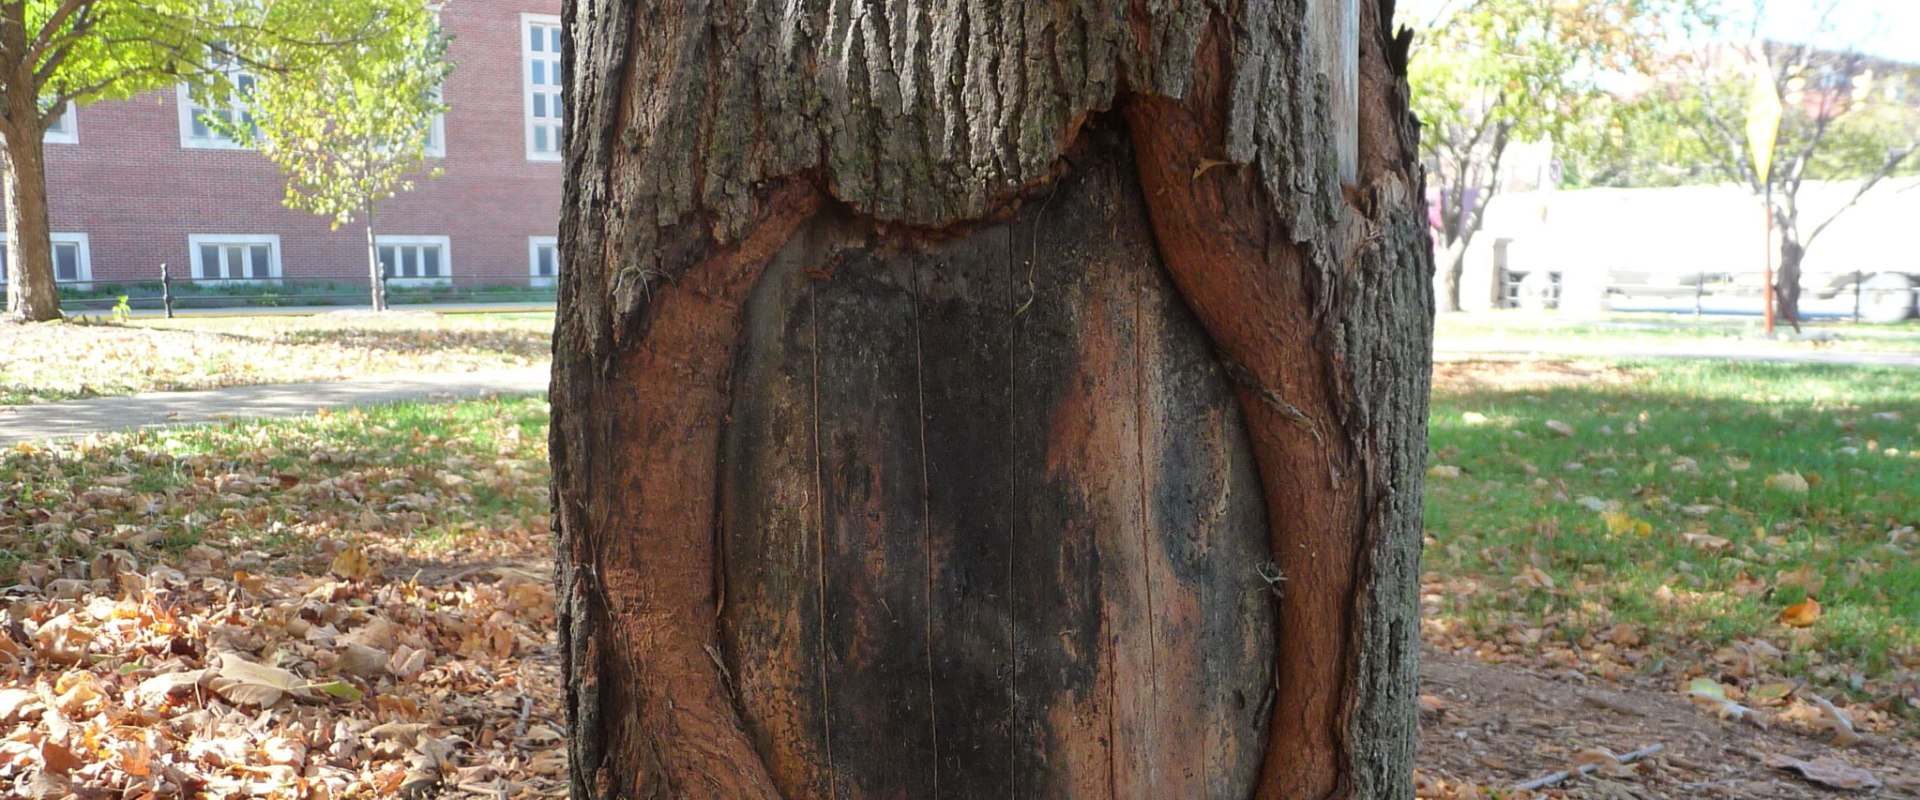 How does a tree repair itself from damage?